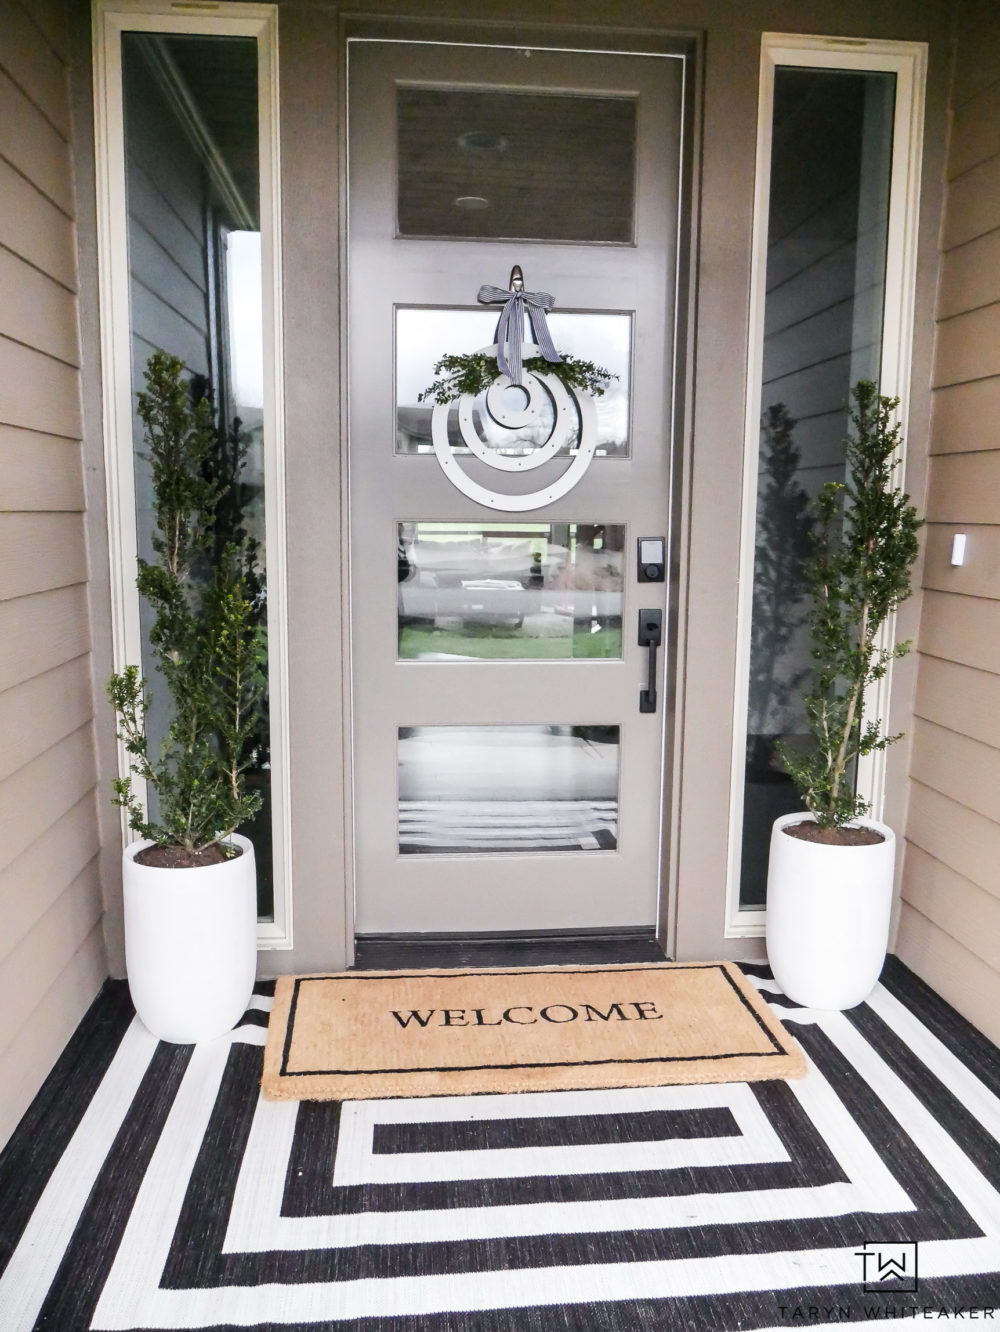 Get your porch ready for spring! Taryn shares her tips for decorating a front porch and reveals her modern spring porch decor! The black and white outdoor rug makes such a statement!